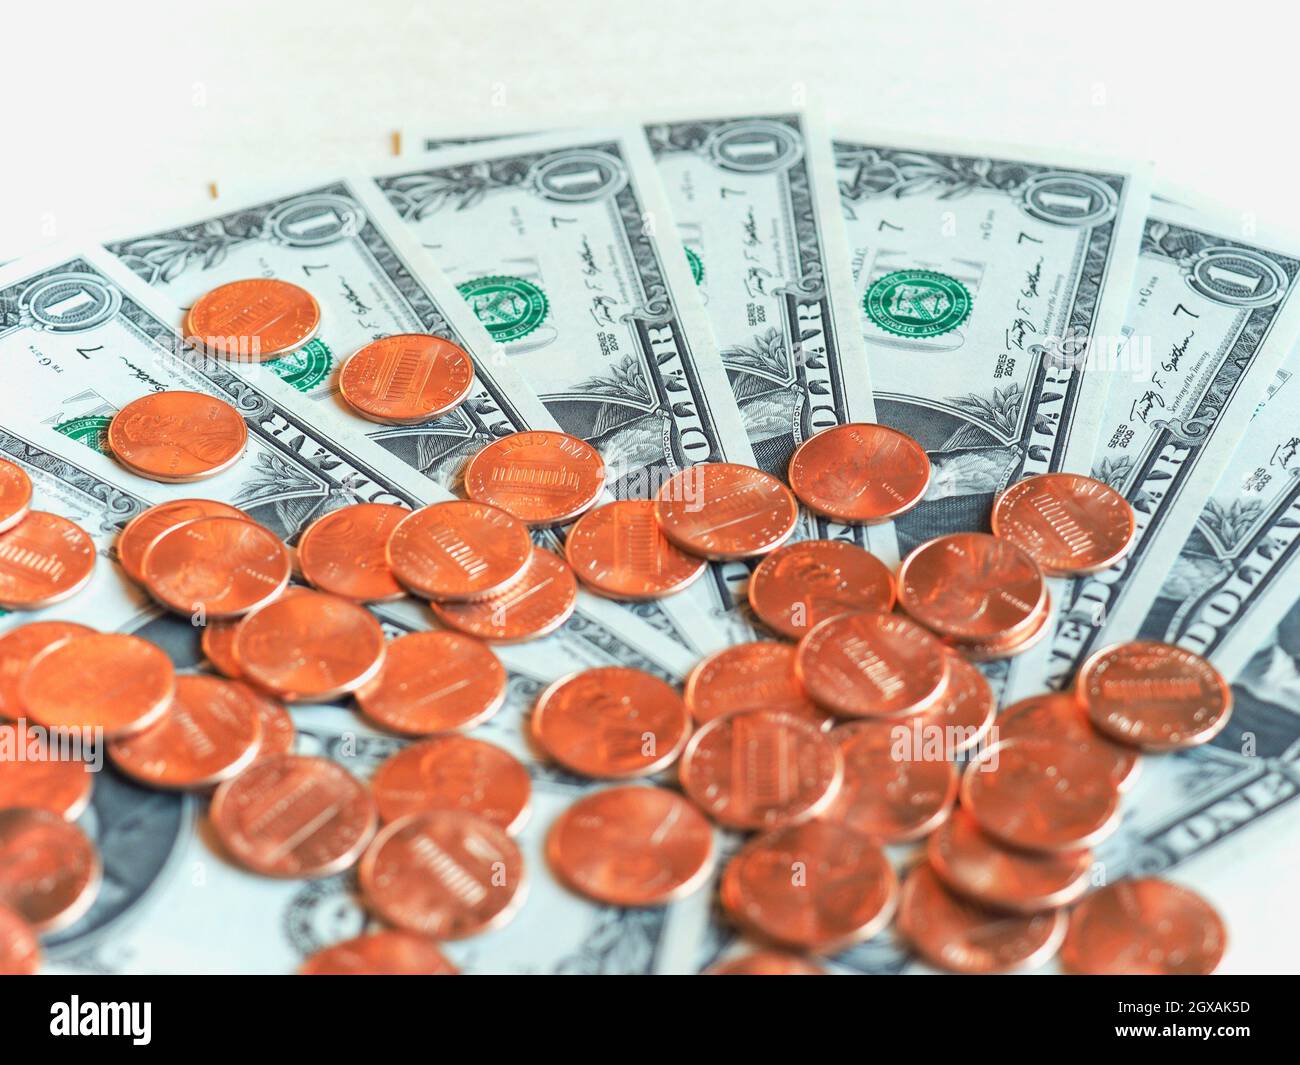 Dollar (USD) banknotes and coins, currency of United States (USA). Stock Photo